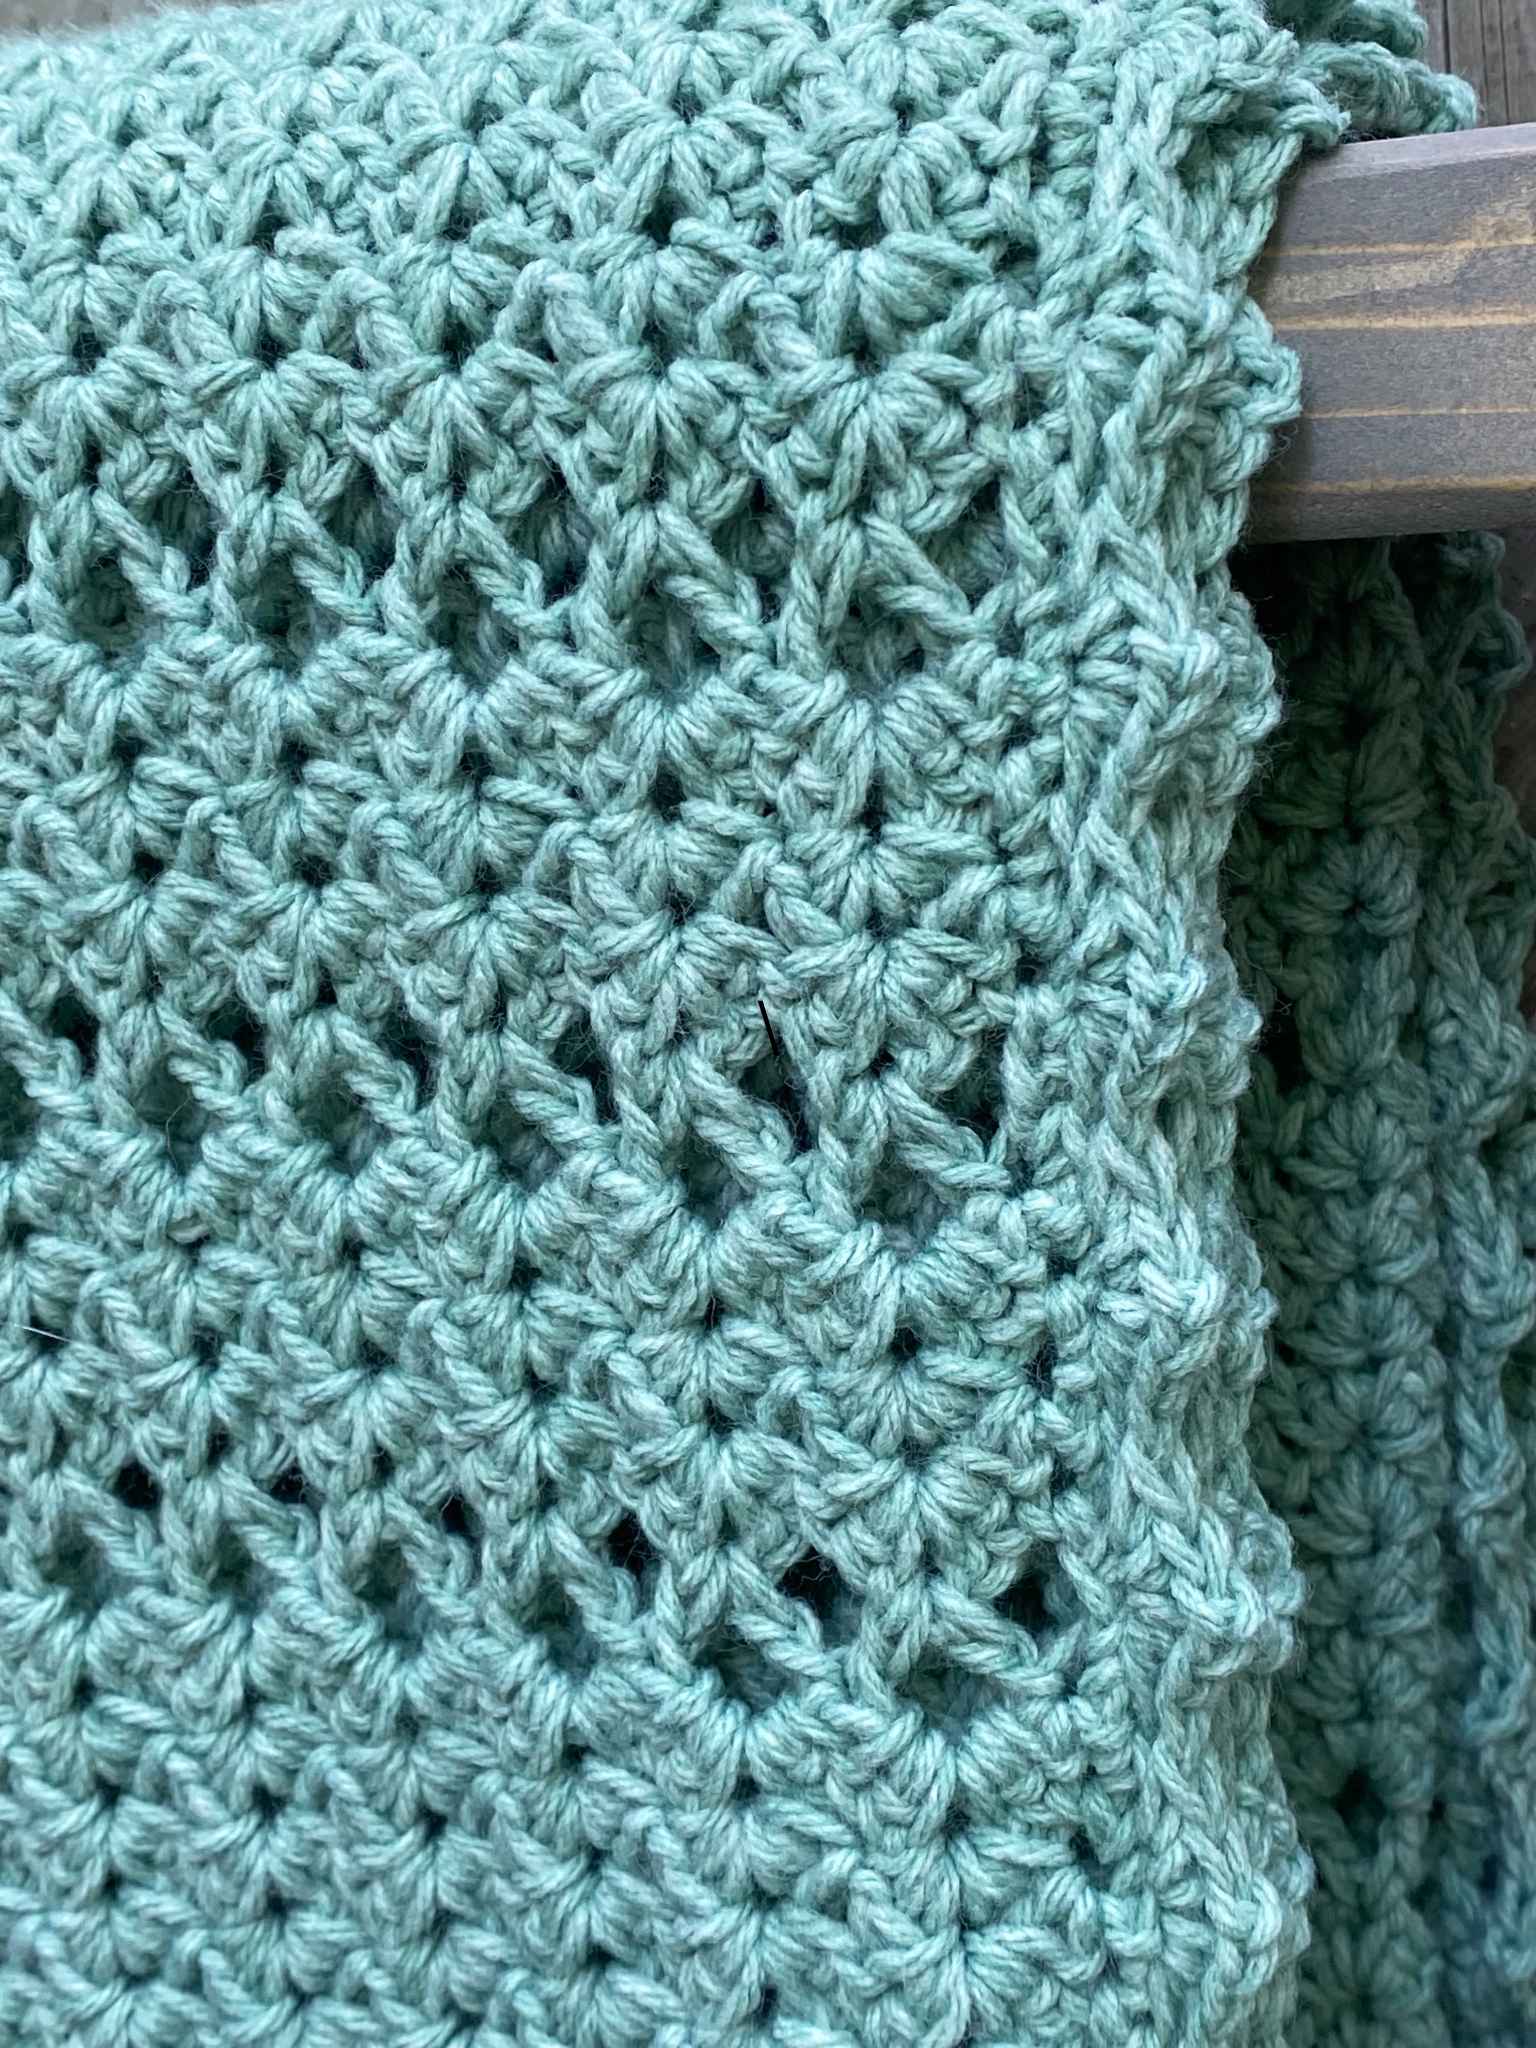 a light greenish blanket that is crocheted and hanging on a blanket ladder